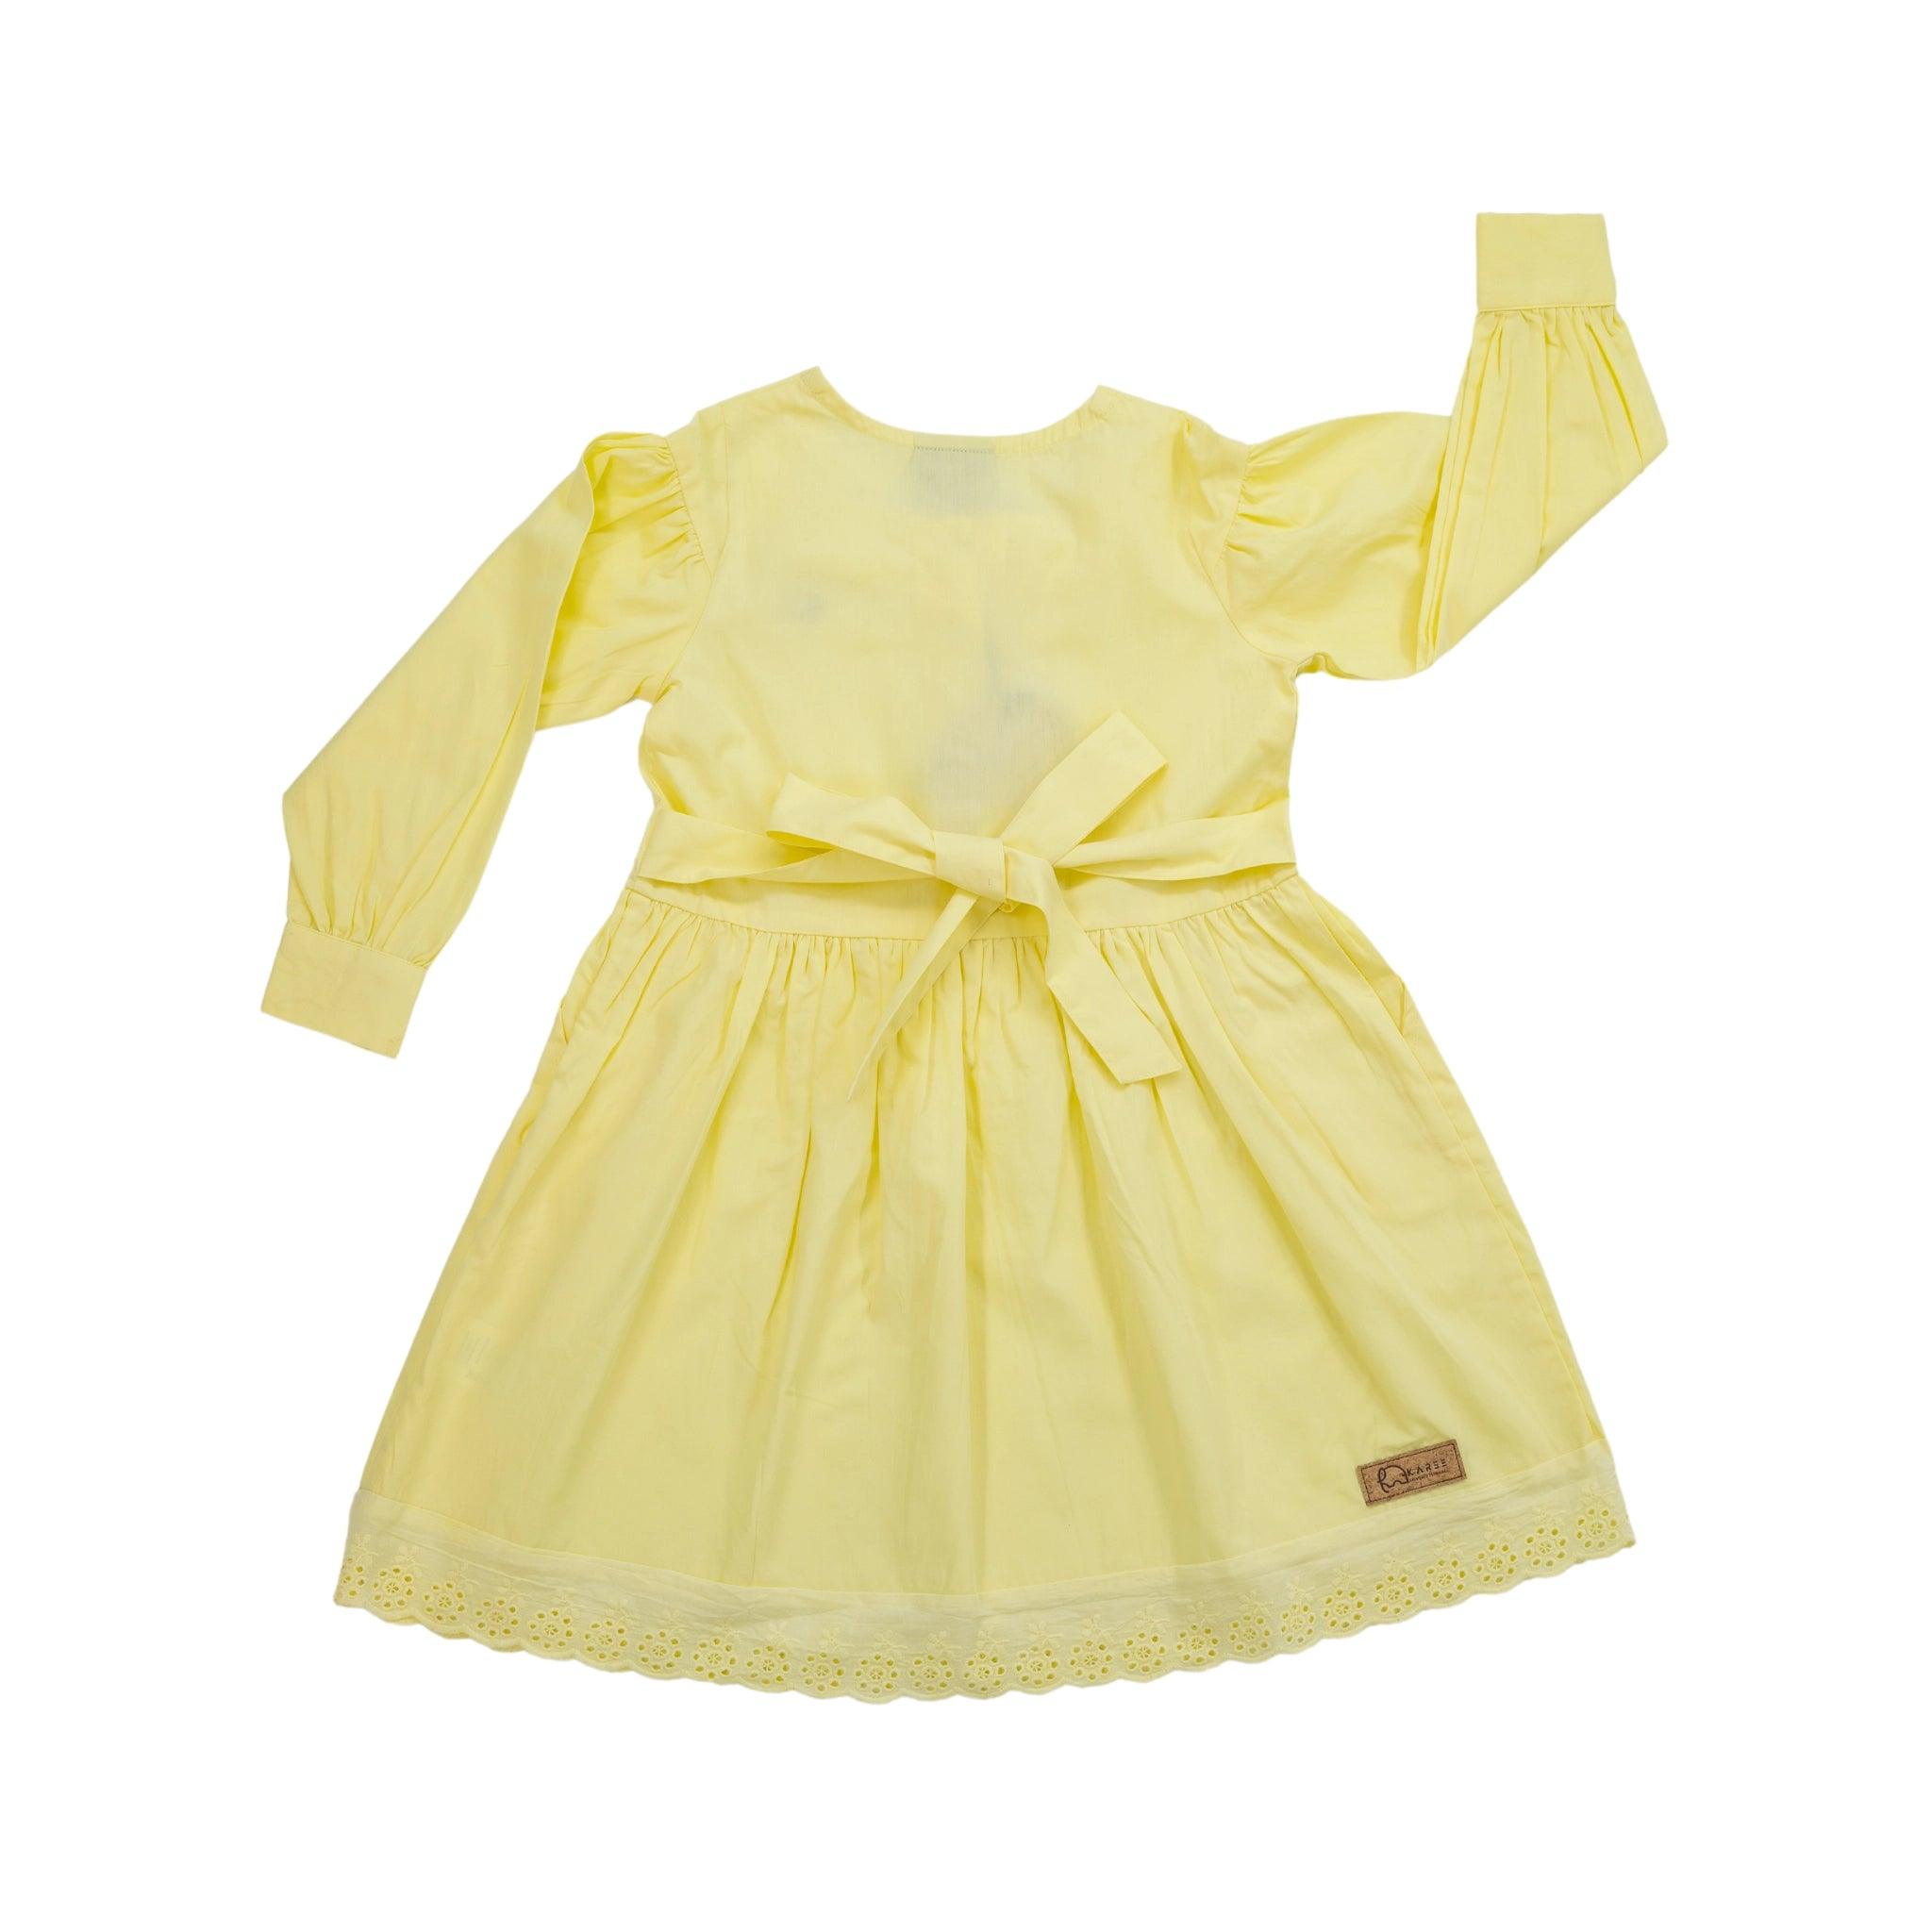 A pale yellow children's dress with long puff sleeves, a waist bow, and lace detailing at the hem, displayed against a white background. (Yellow Long Puff Sleeve Cotton Dress by Karee)